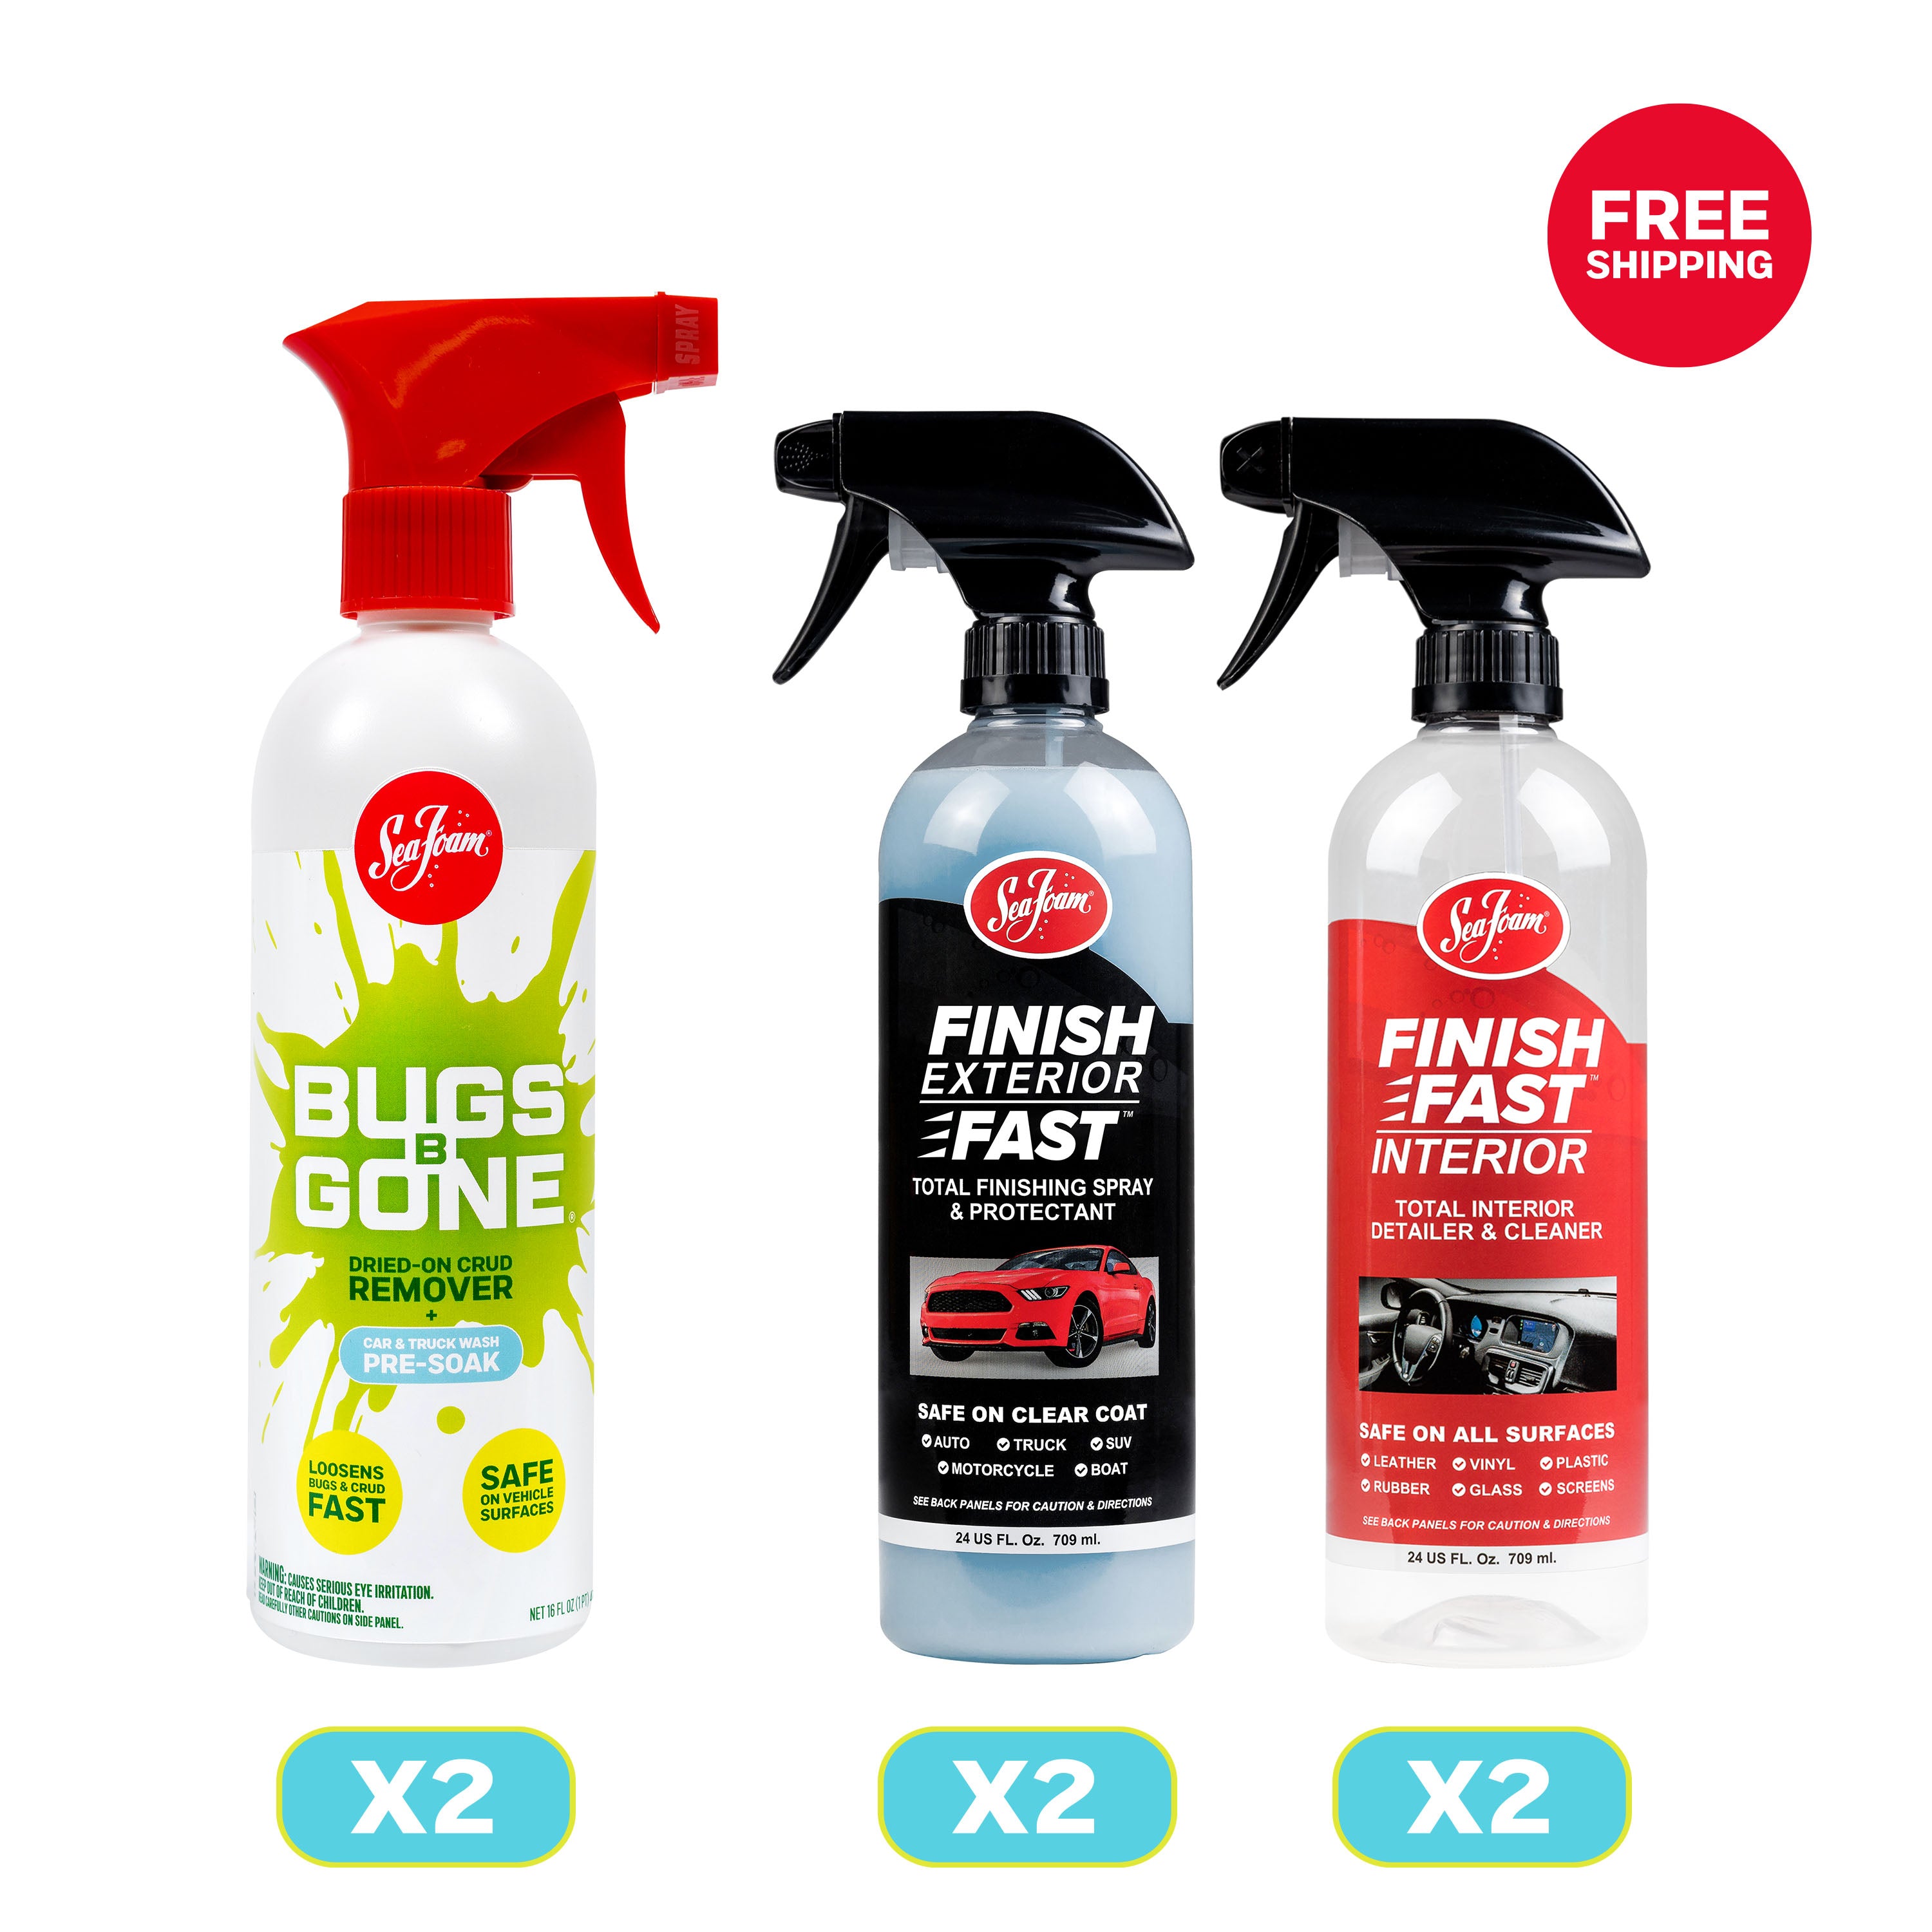 Clean + Detail Best Value (Save 25% + Free Shipping Bundle) – Bugs